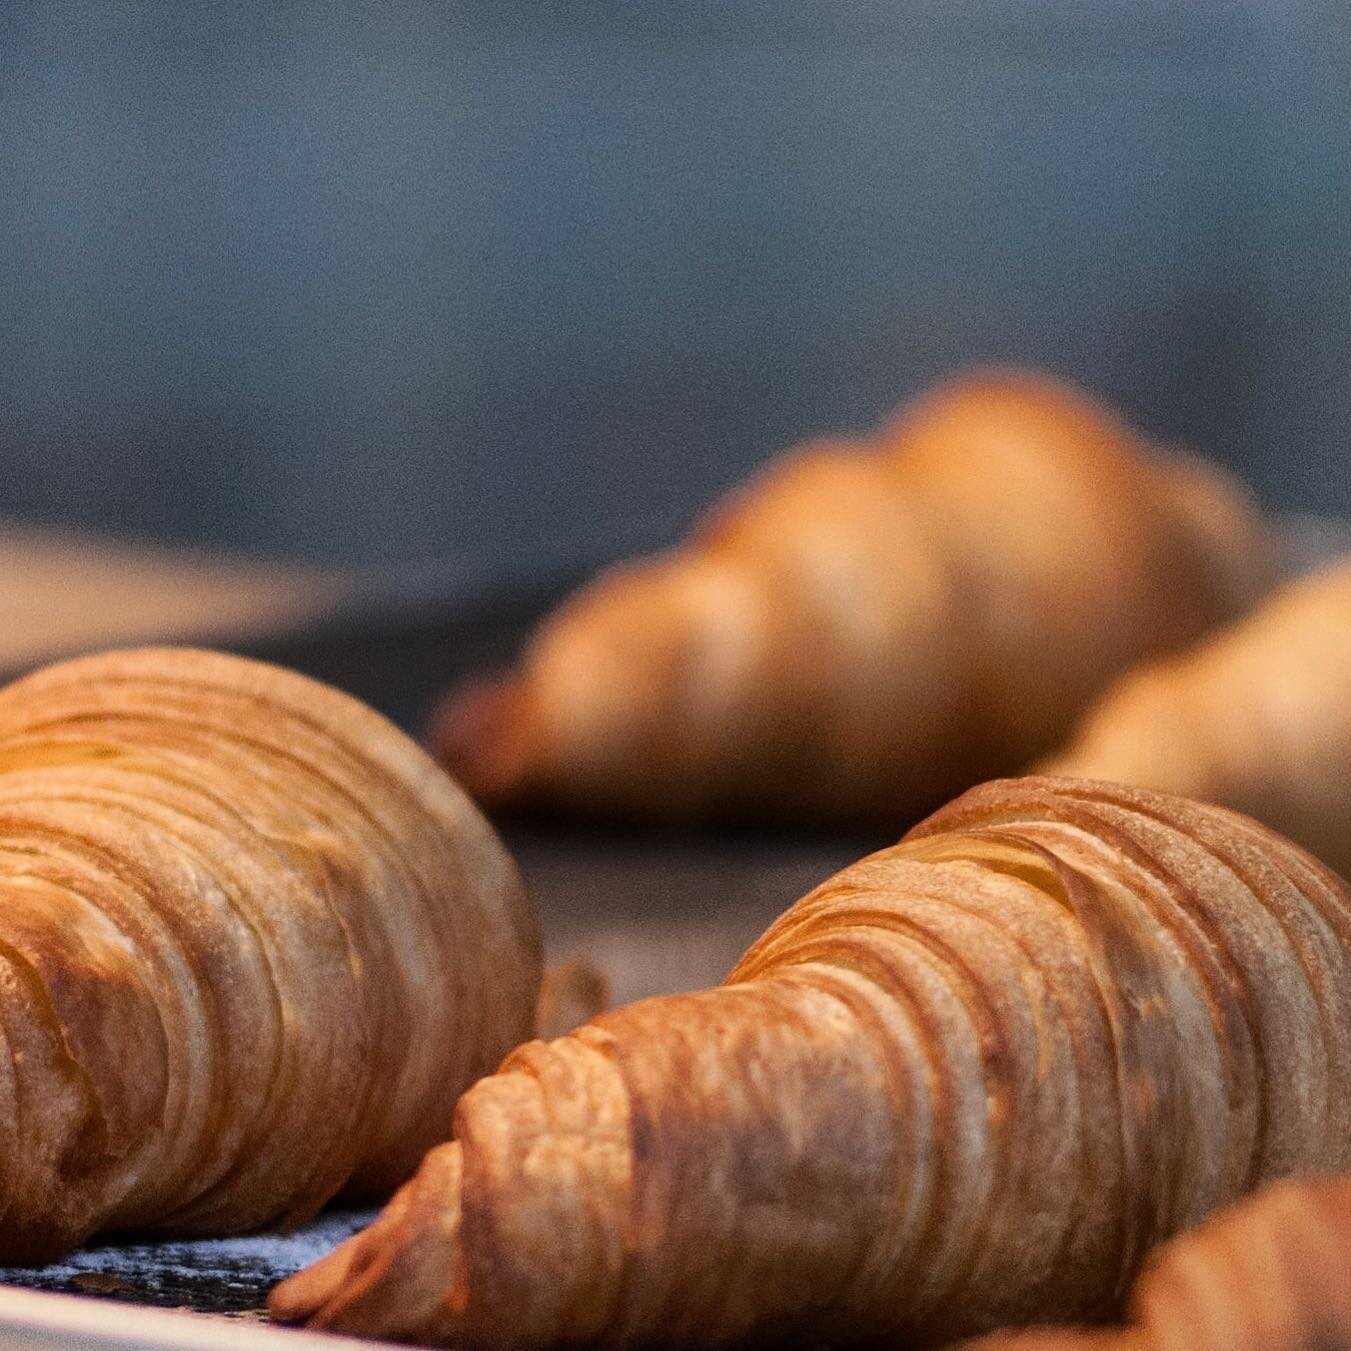 Our #croissants are crafted to perfection! #food #breakfast #hotel #restaurant #brooklyn #nyc #hilton